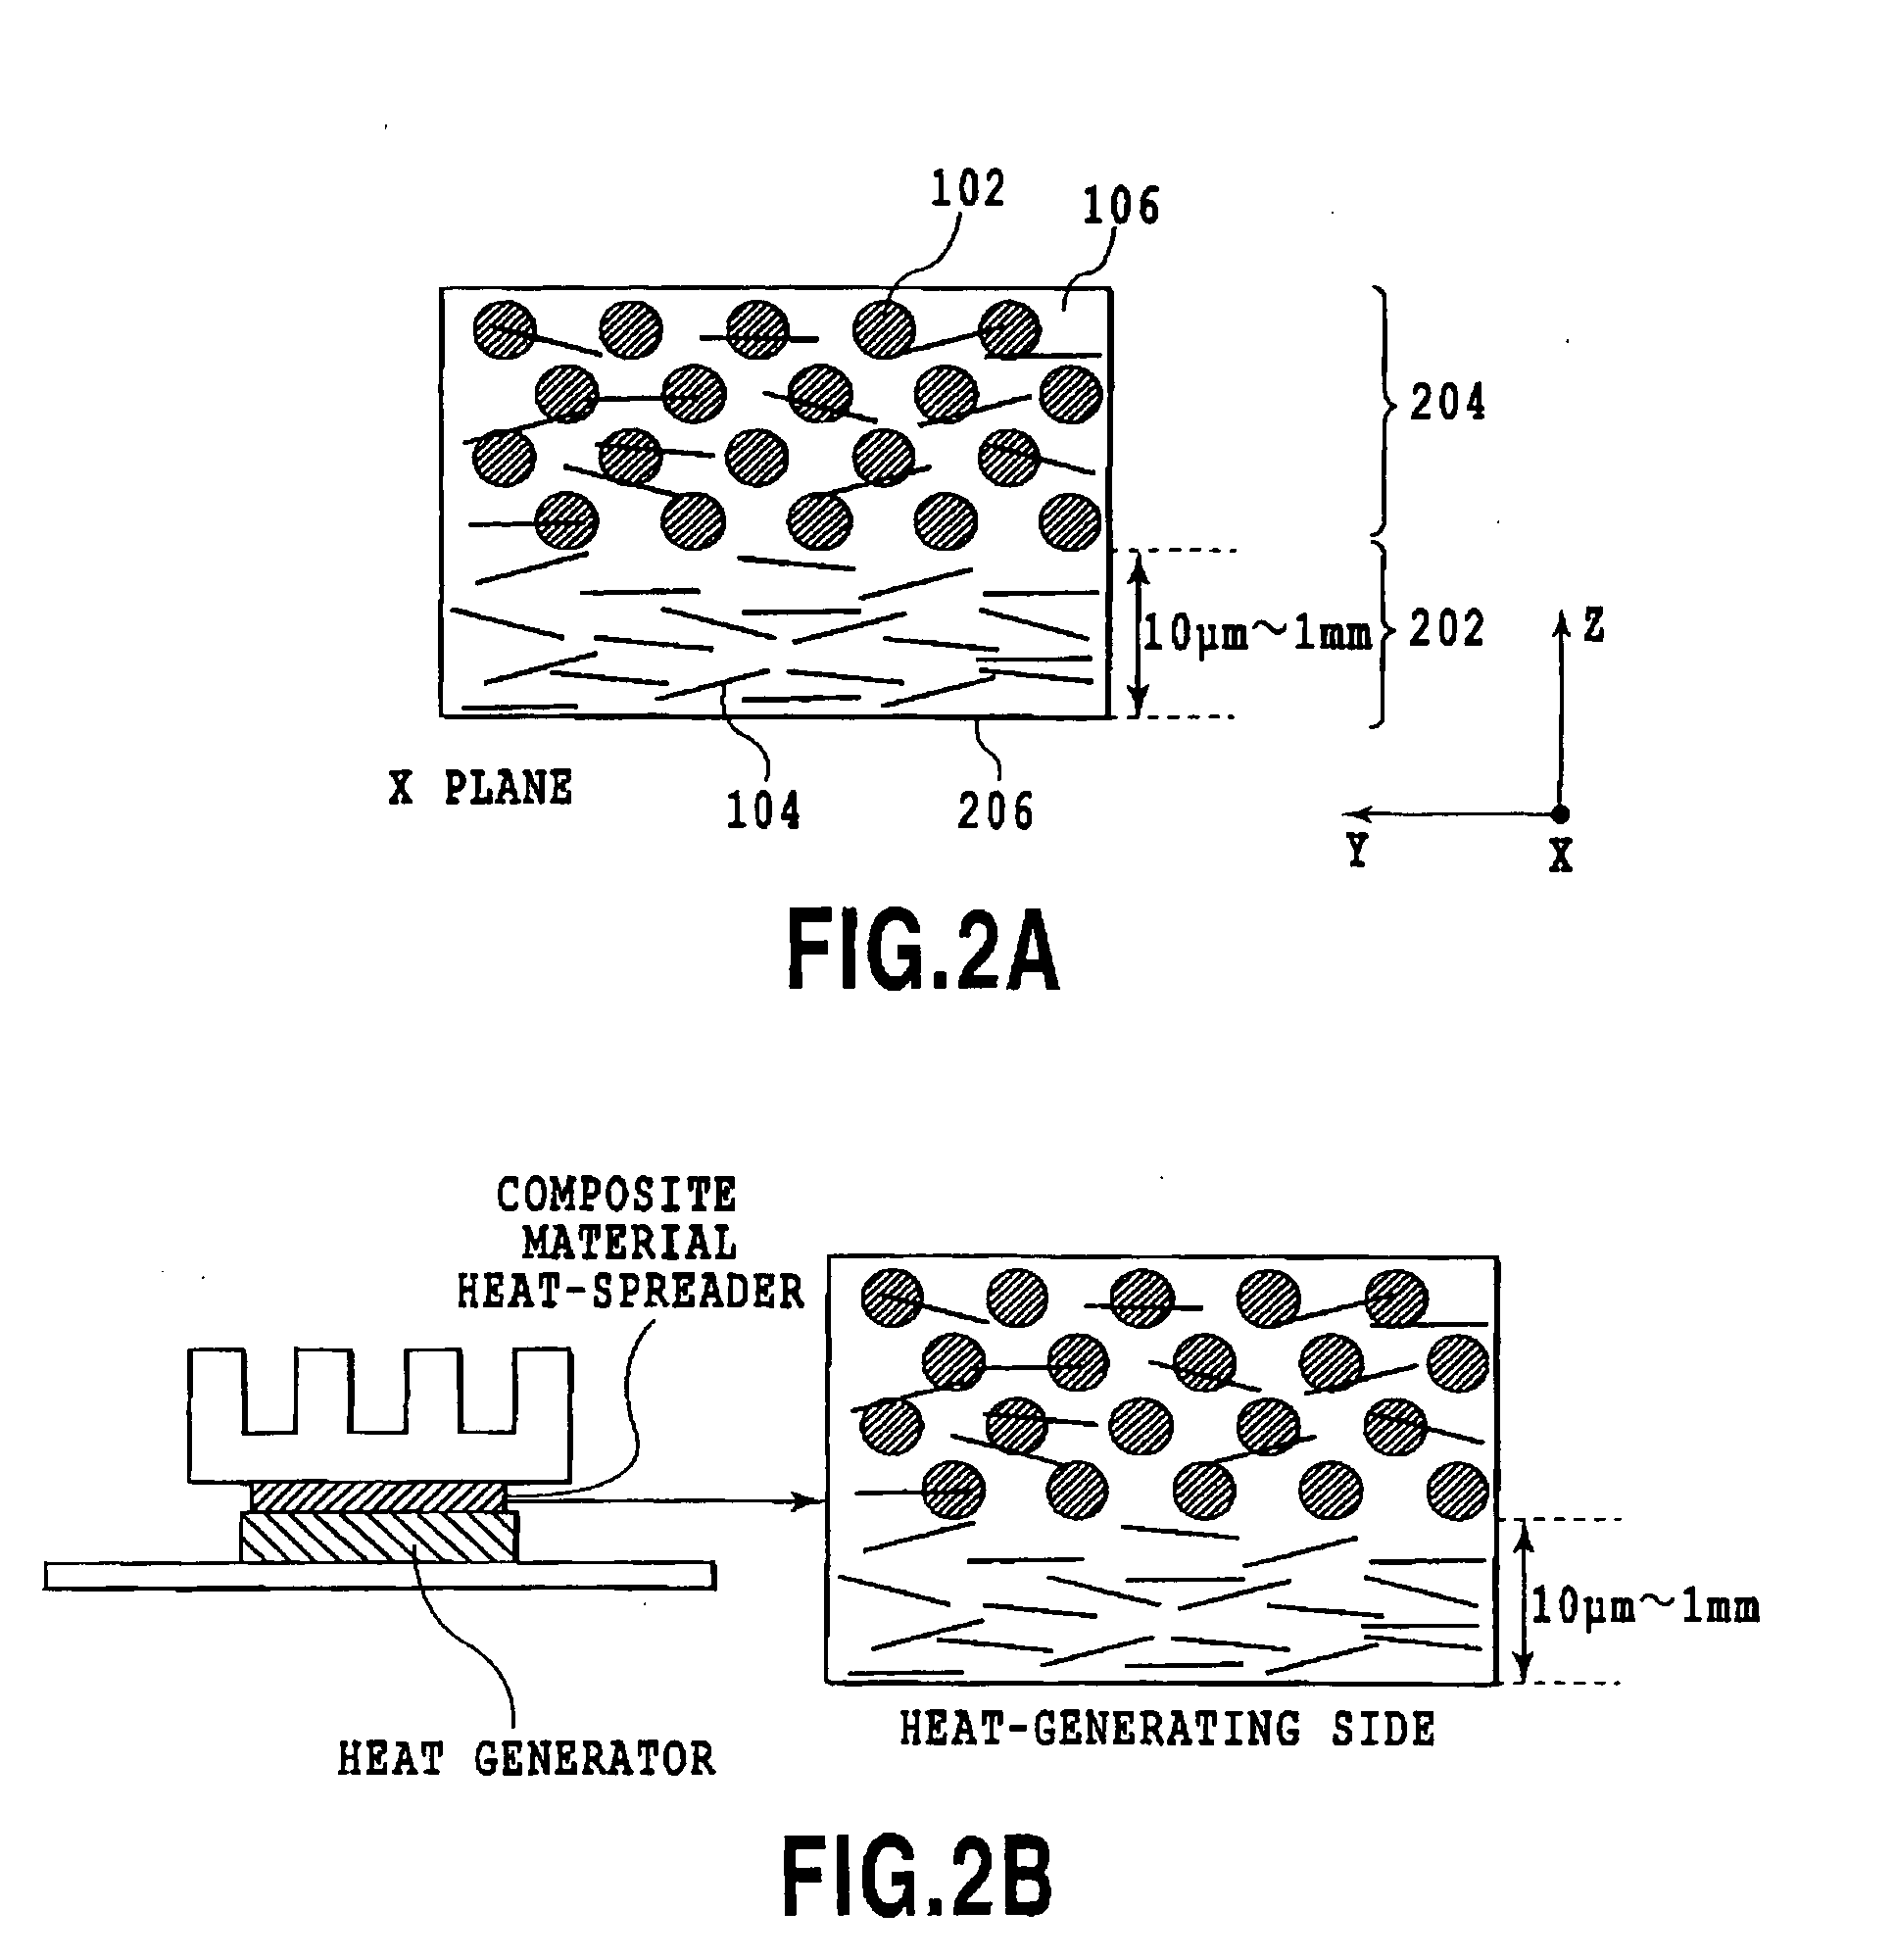 Metal-Based Composite Material Containing Both Micron-Size Carbon Fiber and Nano-Size Carbon Fiber